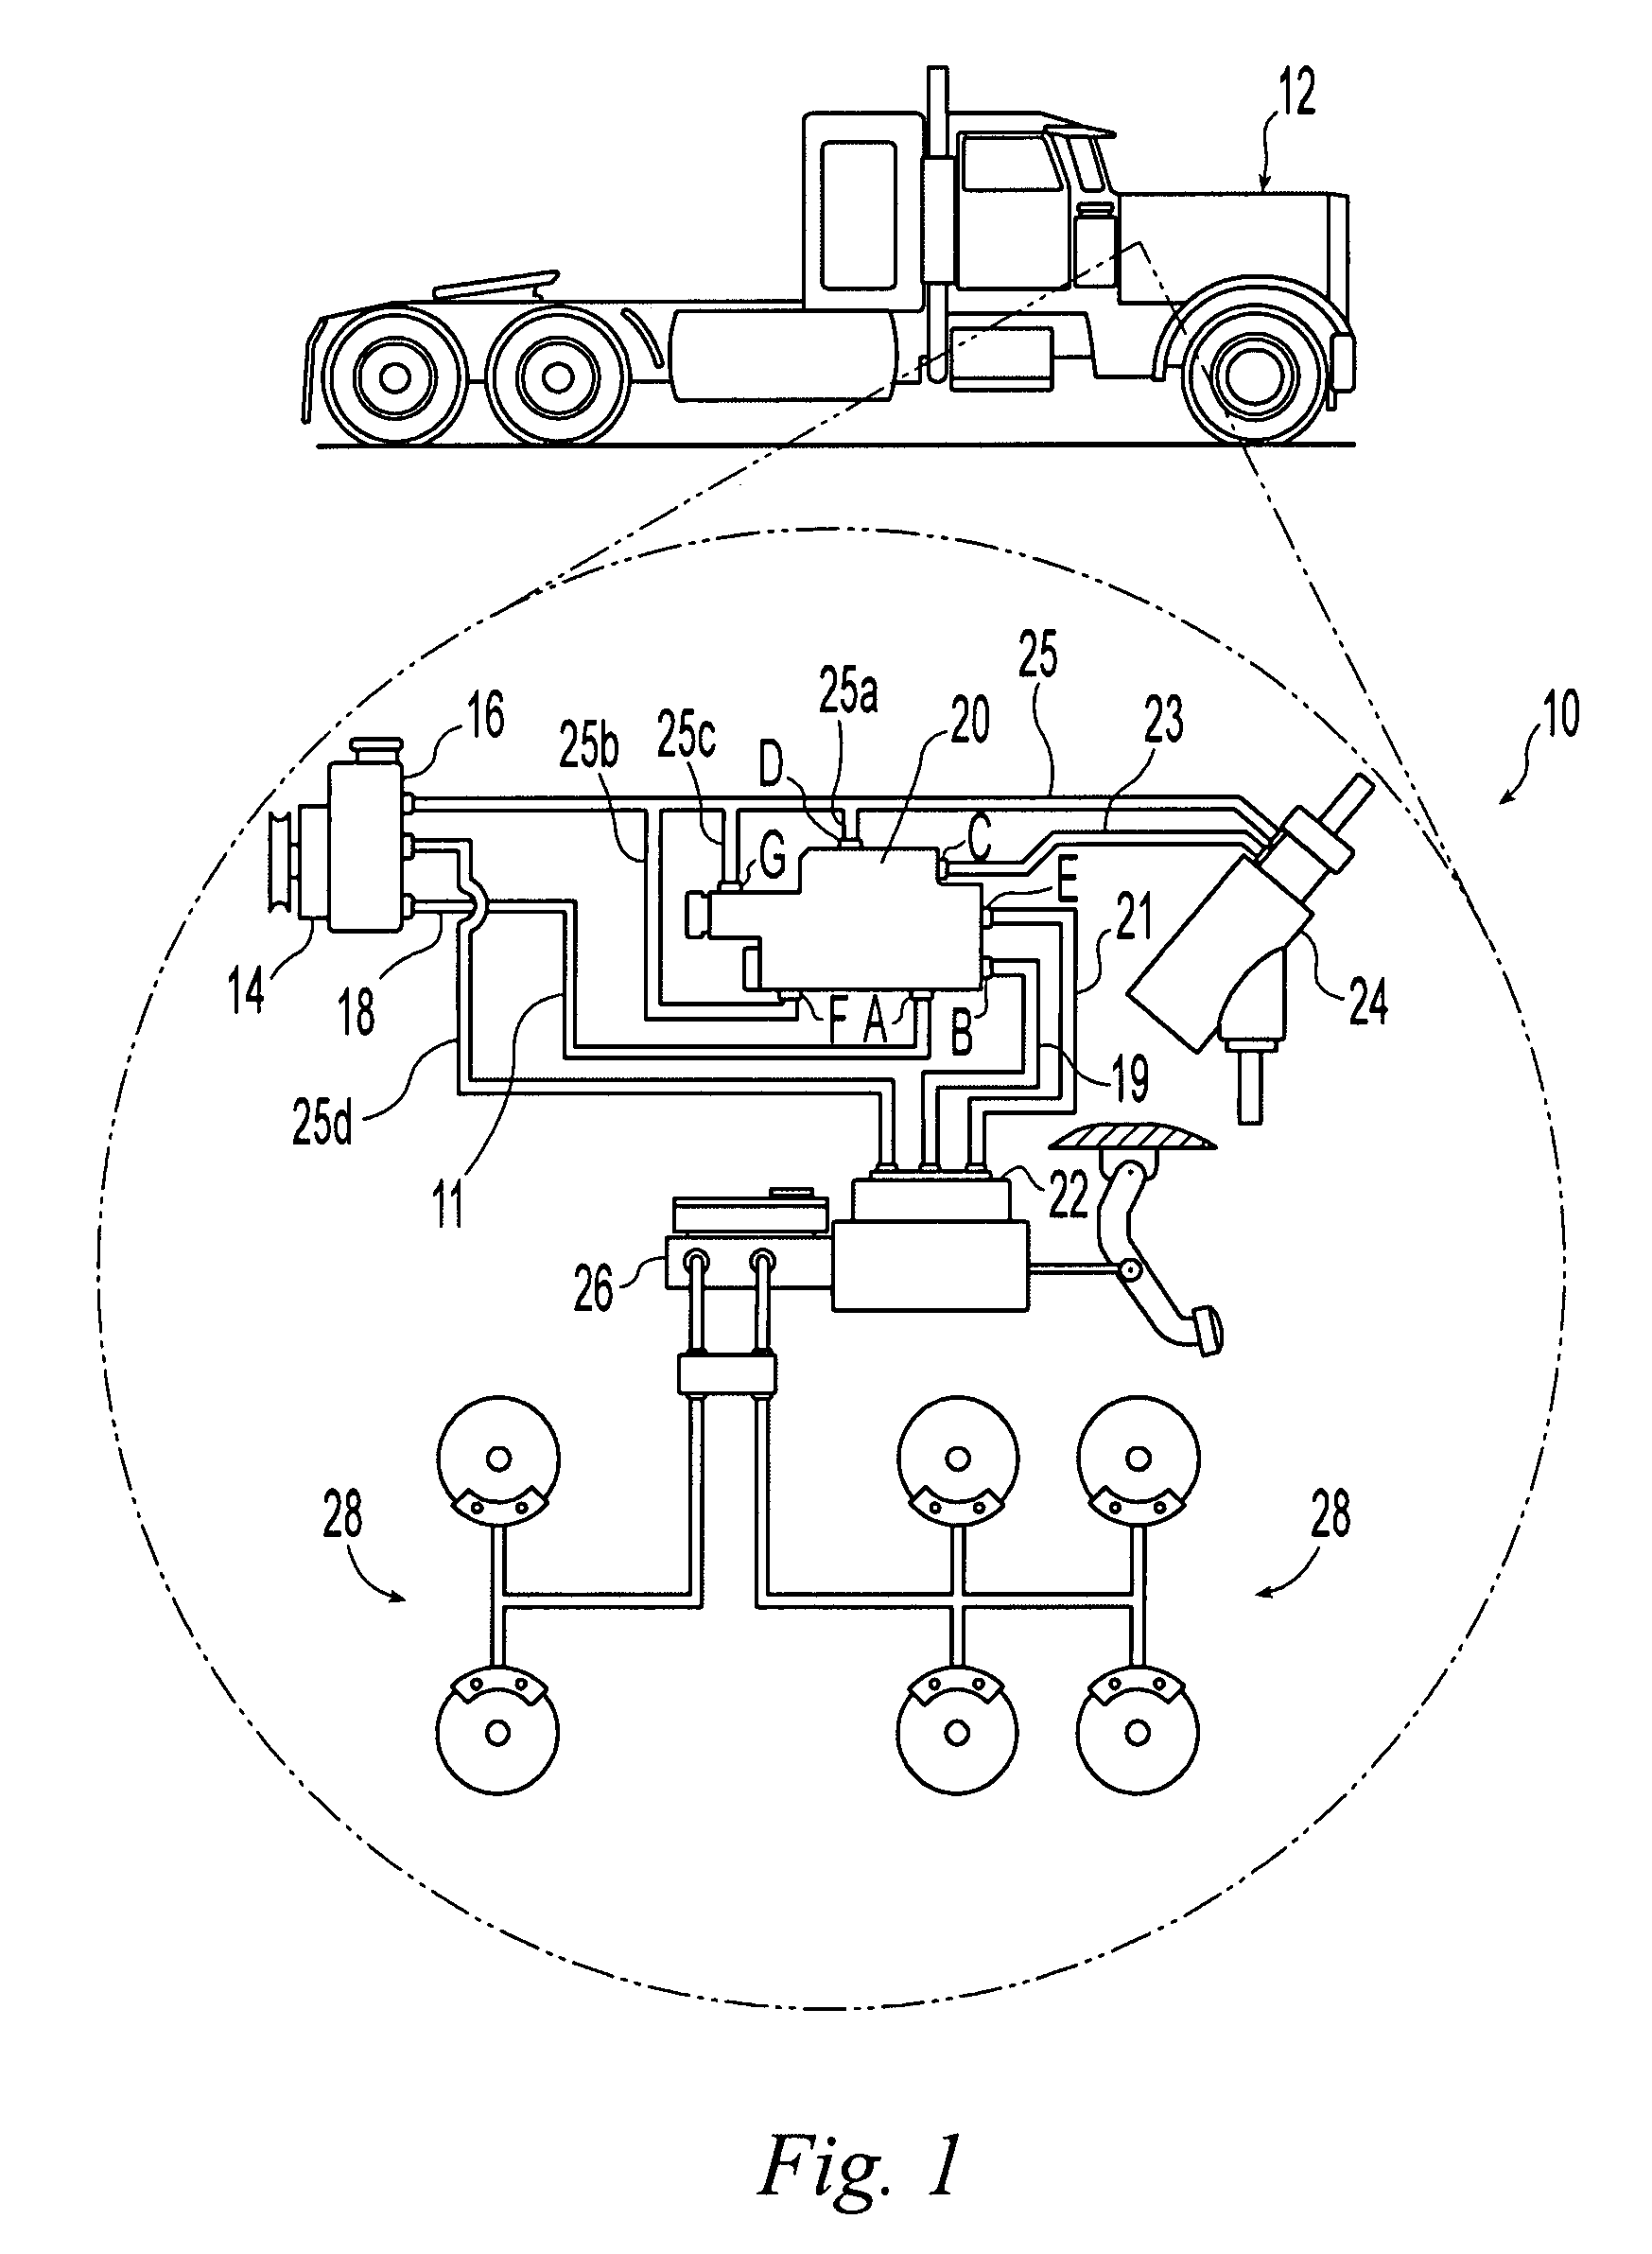 Vehicular hydraulic system with dual relief valve